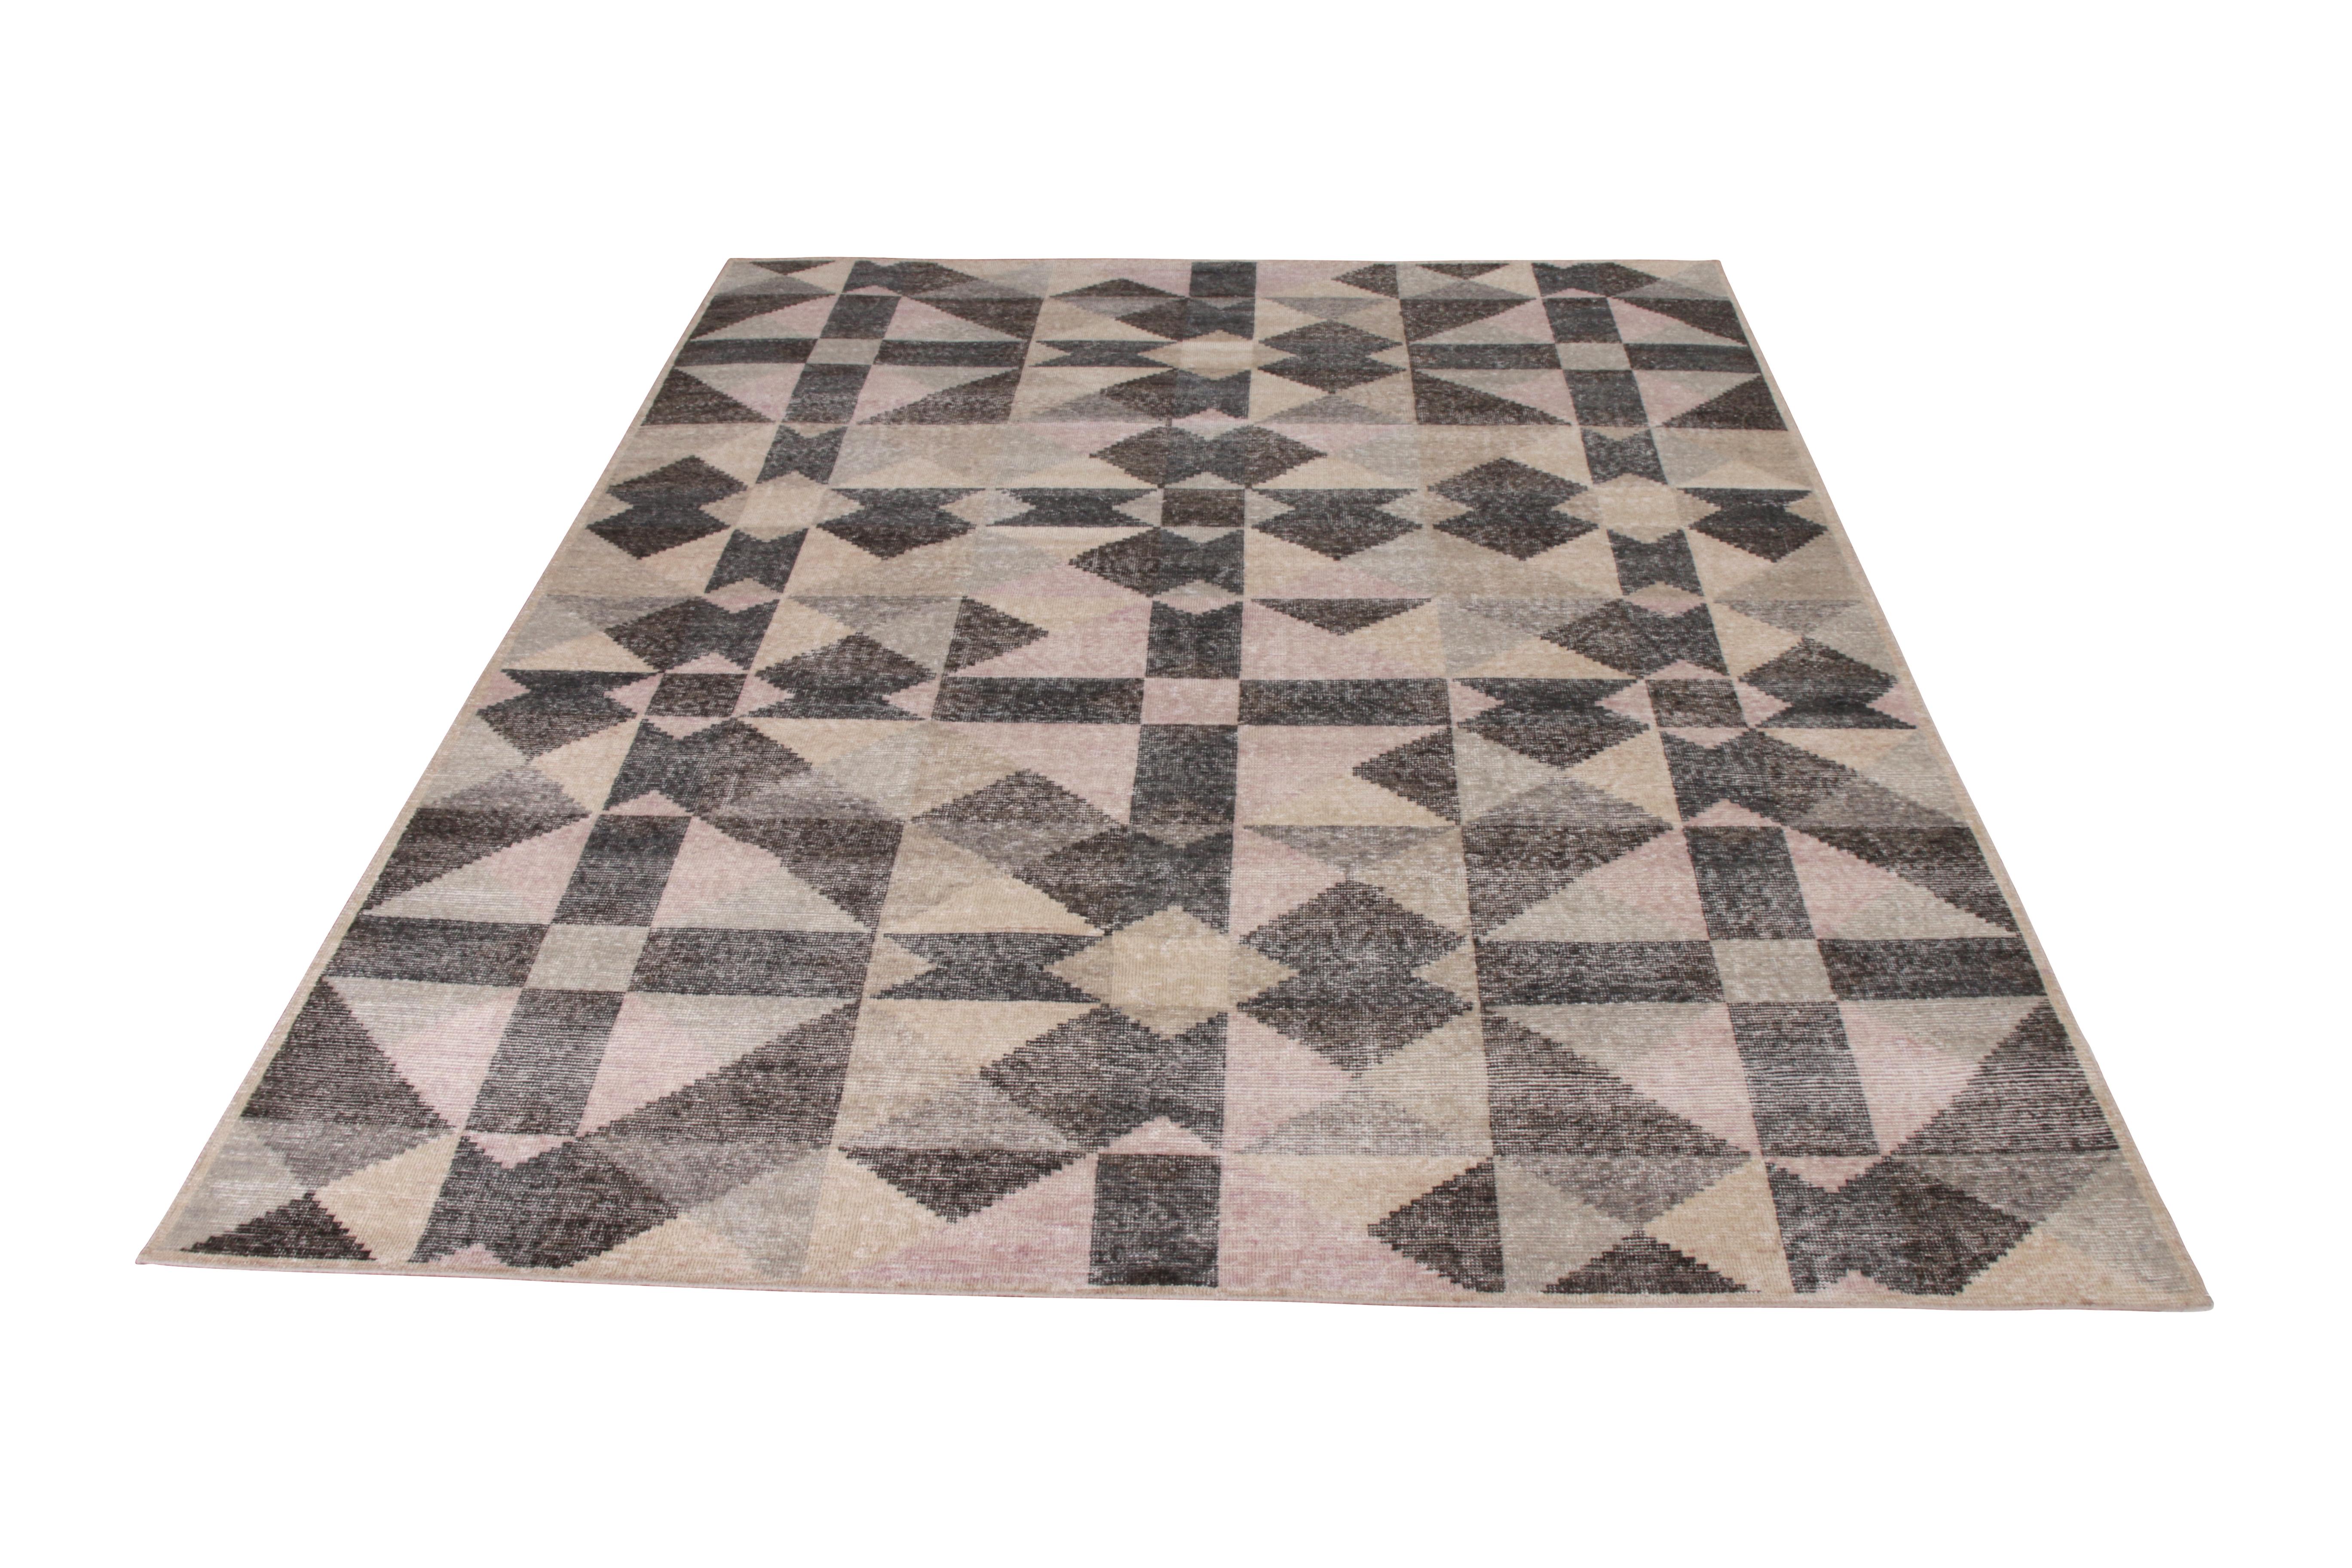 Handmade in a refined, low-pile wool with a comfortable wash achieving this shabby chic distressed style, this 8 x 10 modern rug joins the Homage Collection by Rug & Kilim, representing an encyclopaedic approach to reimagining classic and modern rug